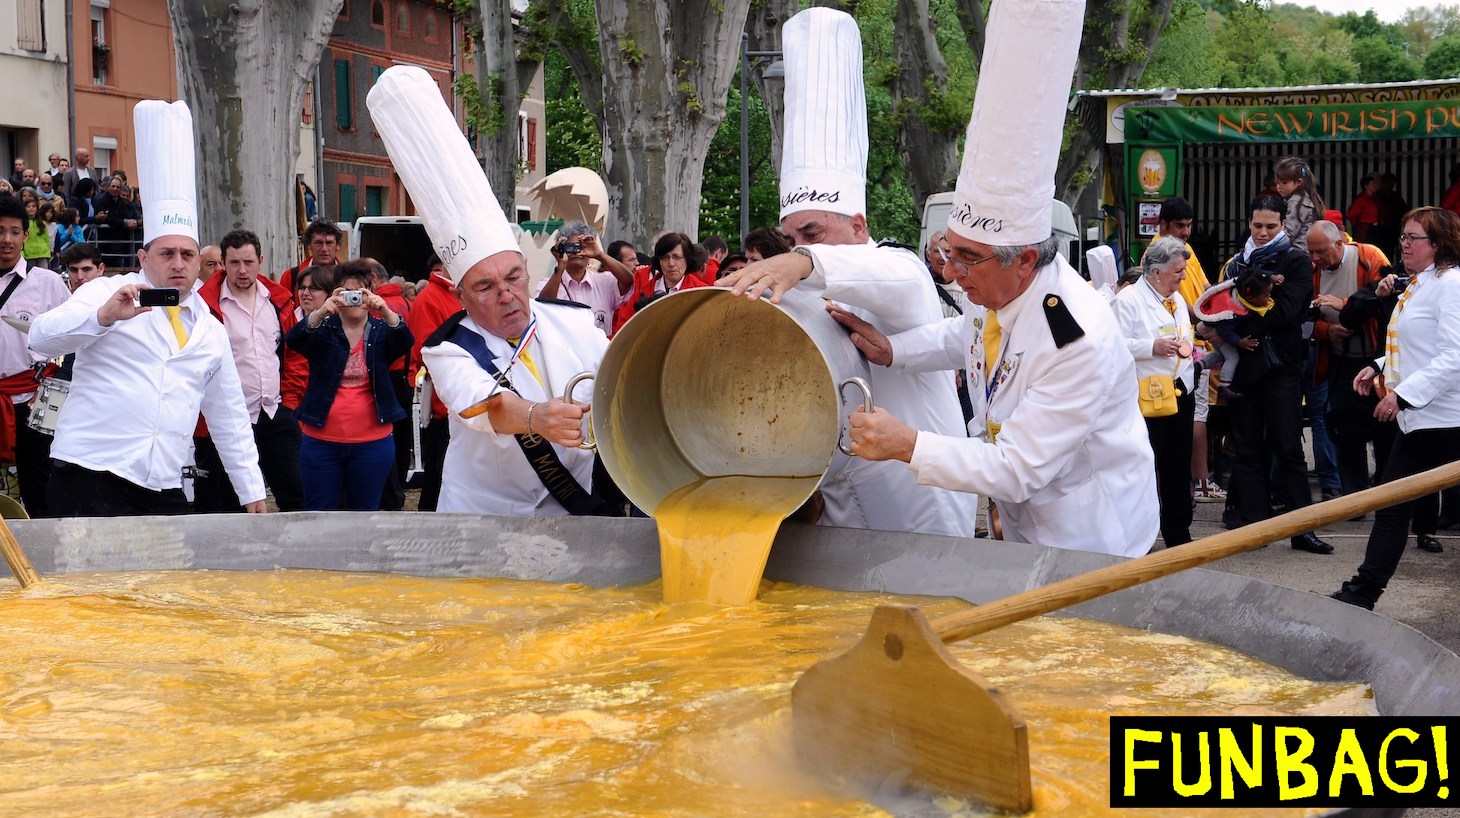 Members of the brotherhood of the Bessieres' giant Easter omelette prepare a giant omelette with thousands of eggs, on April 21, 2014 in Bessieres, southwestern France, as part of a traditional Easter celebration. AFP PHOTO / REMY GABALDA